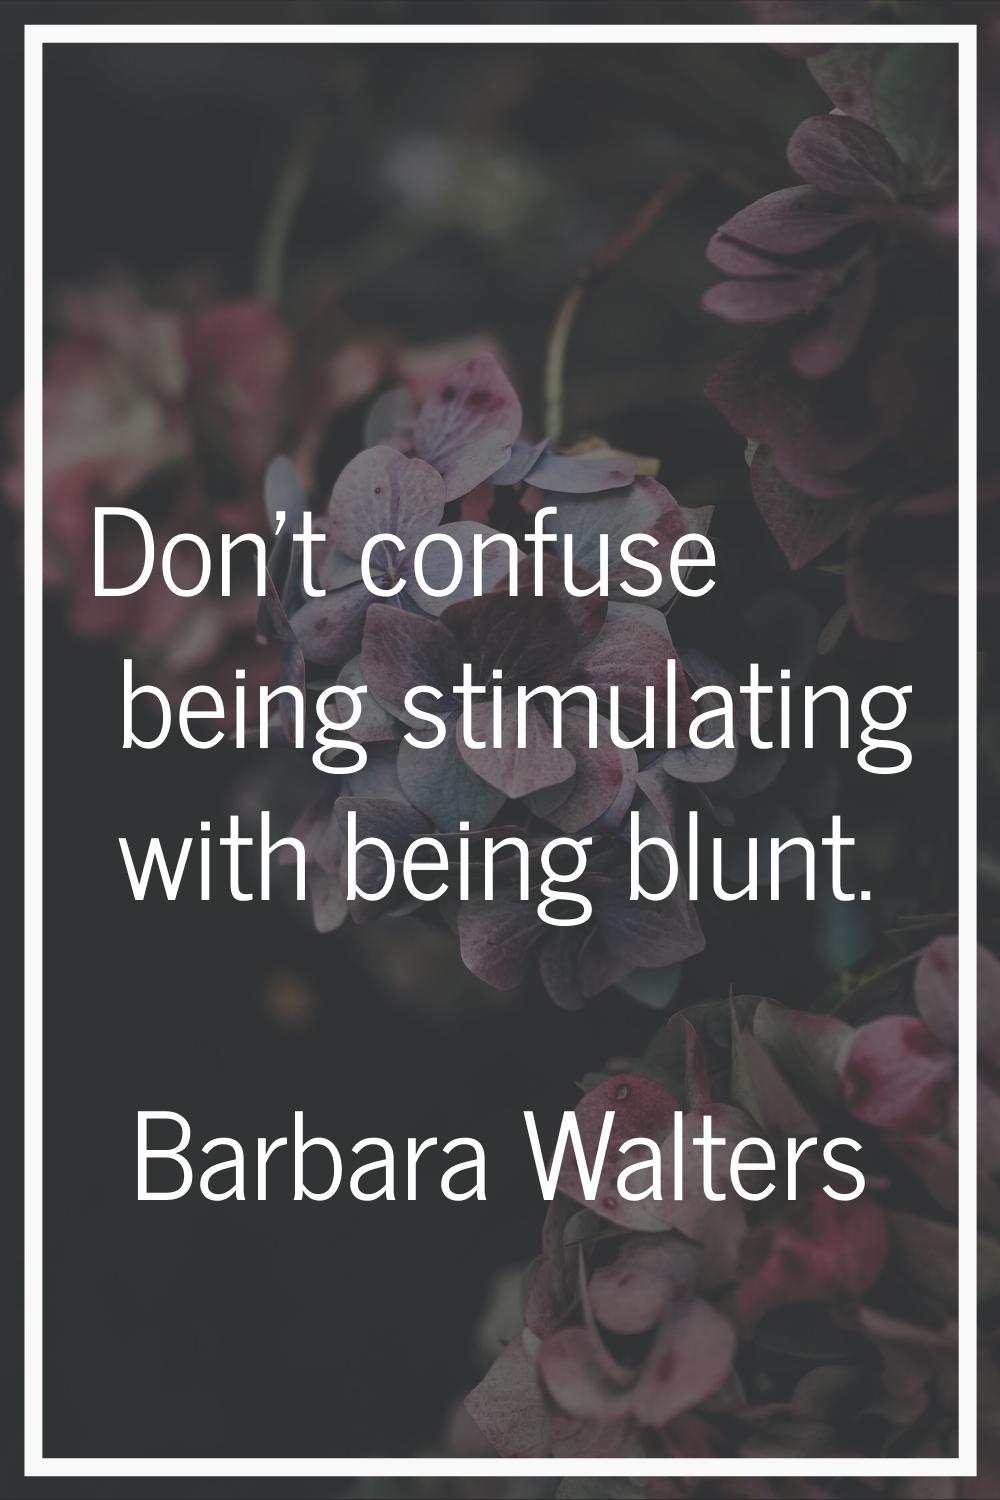 Don't confuse being stimulating with being blunt.